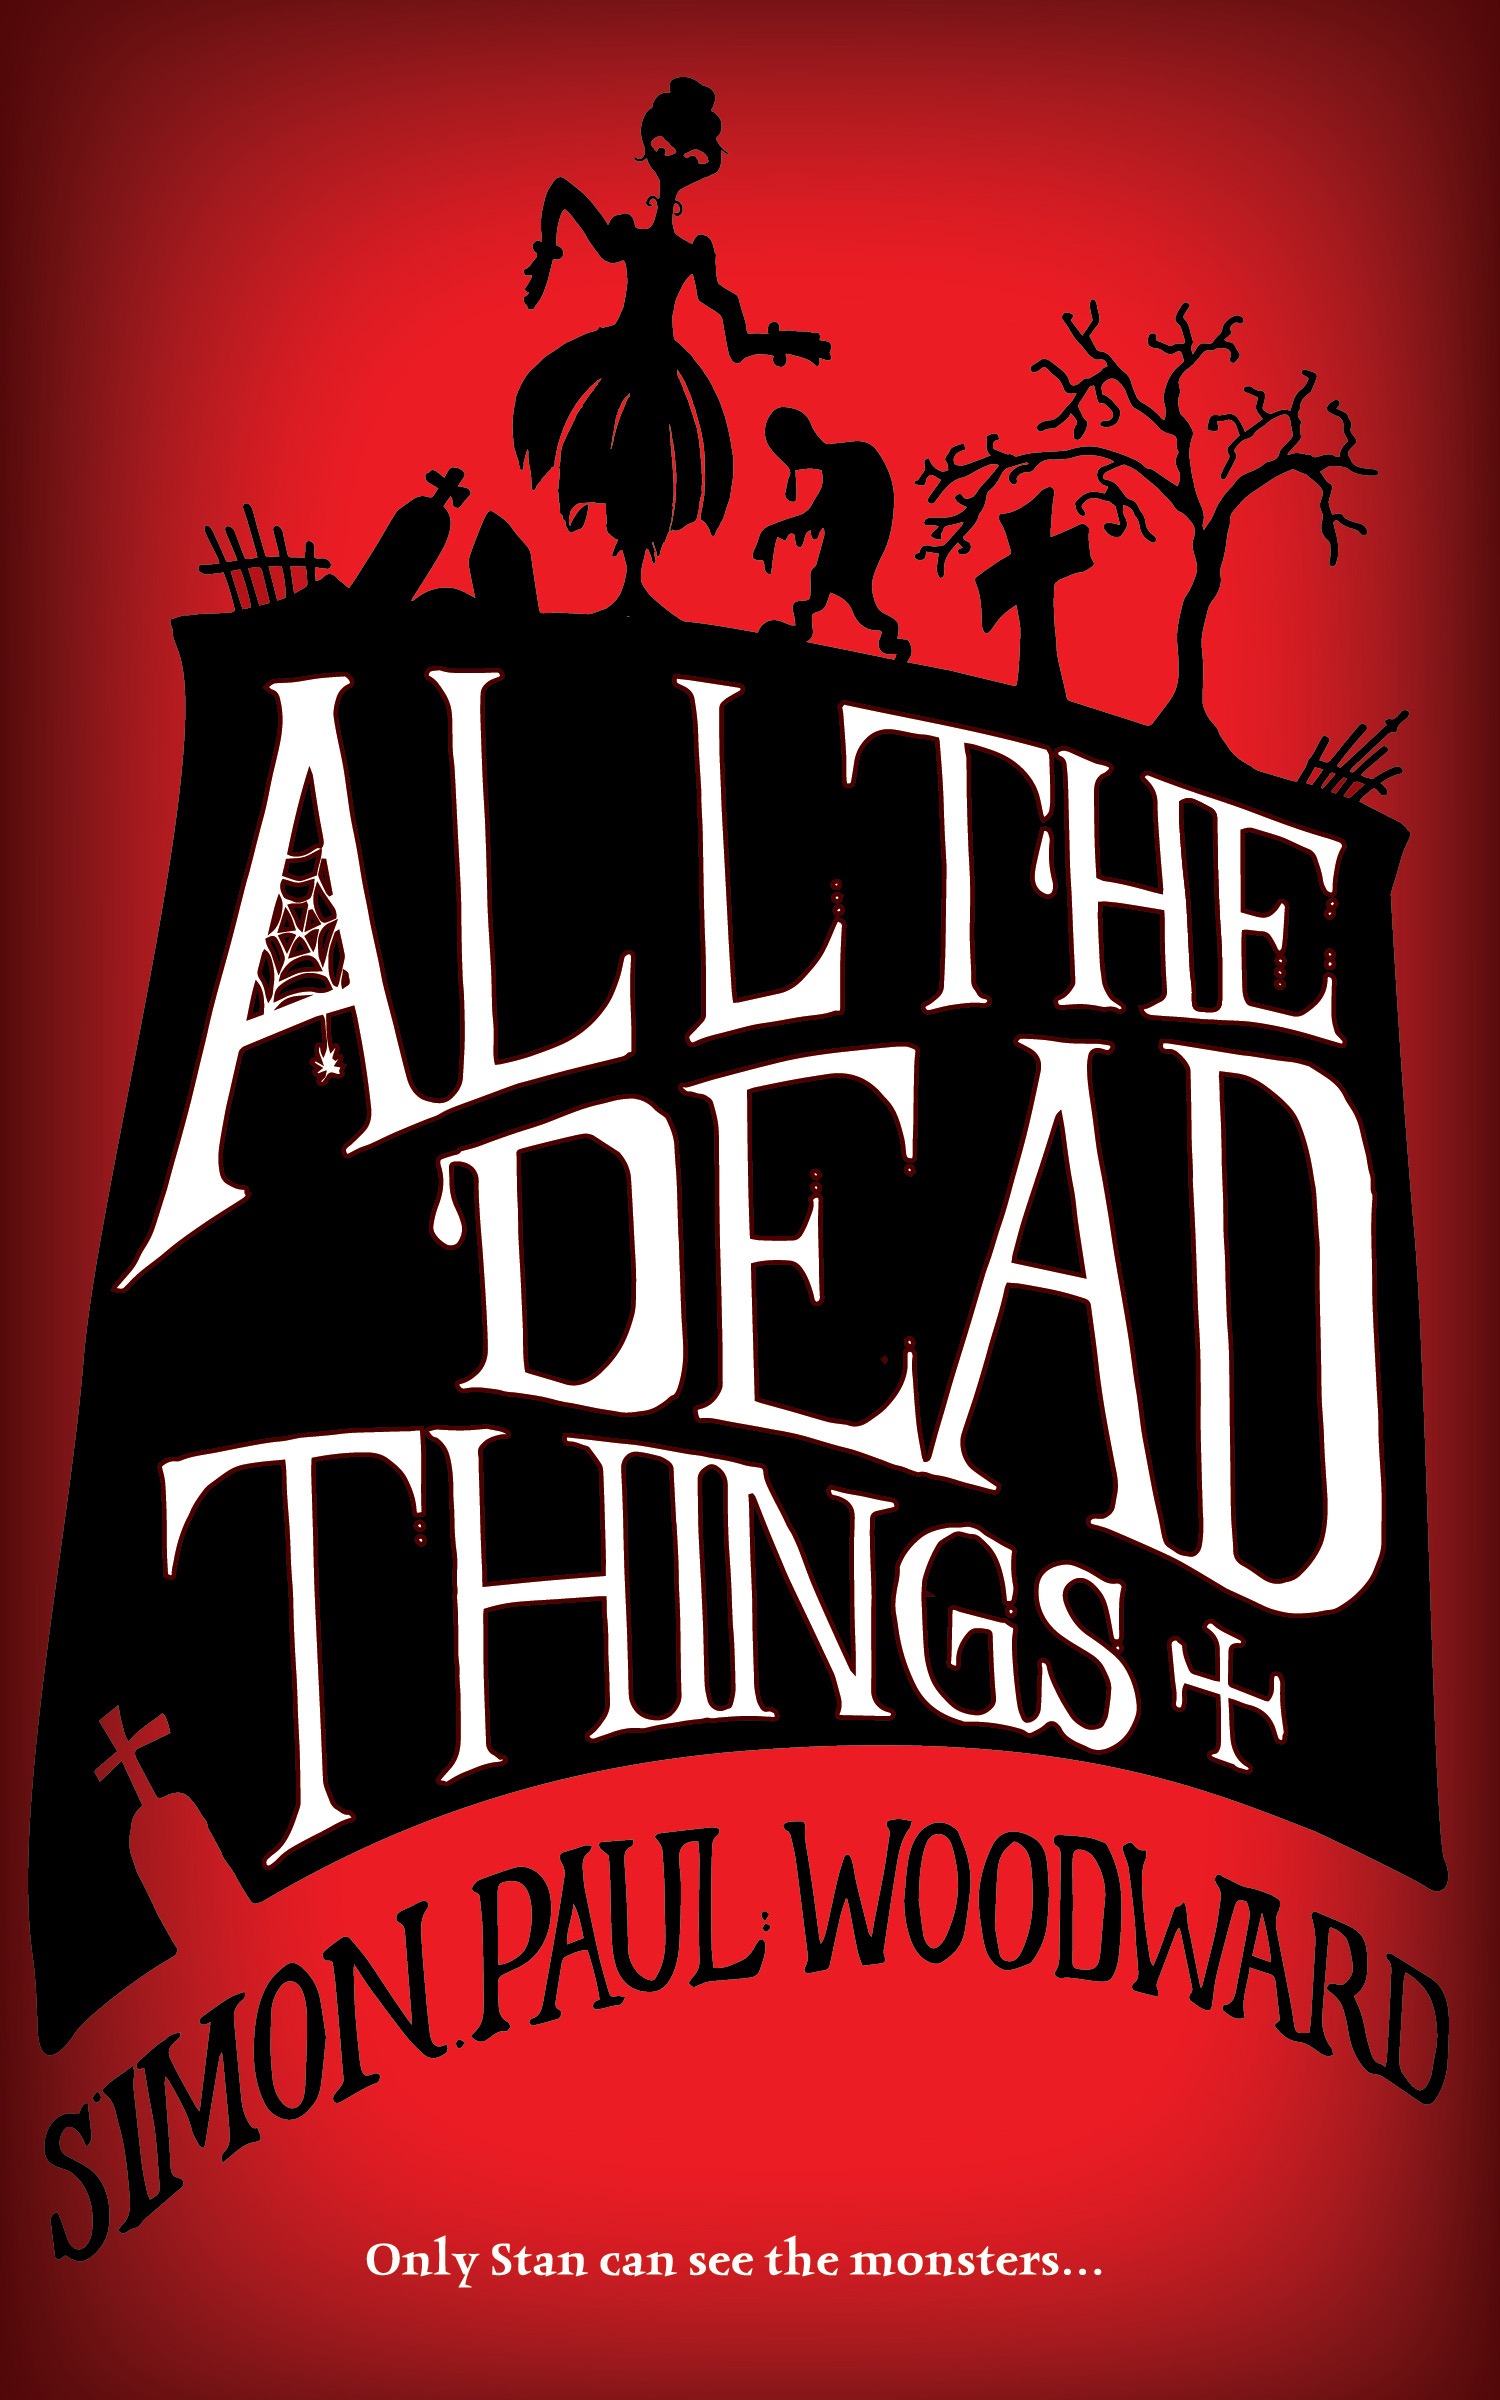 All The Dead Things (Deathlings Chronicles #1)